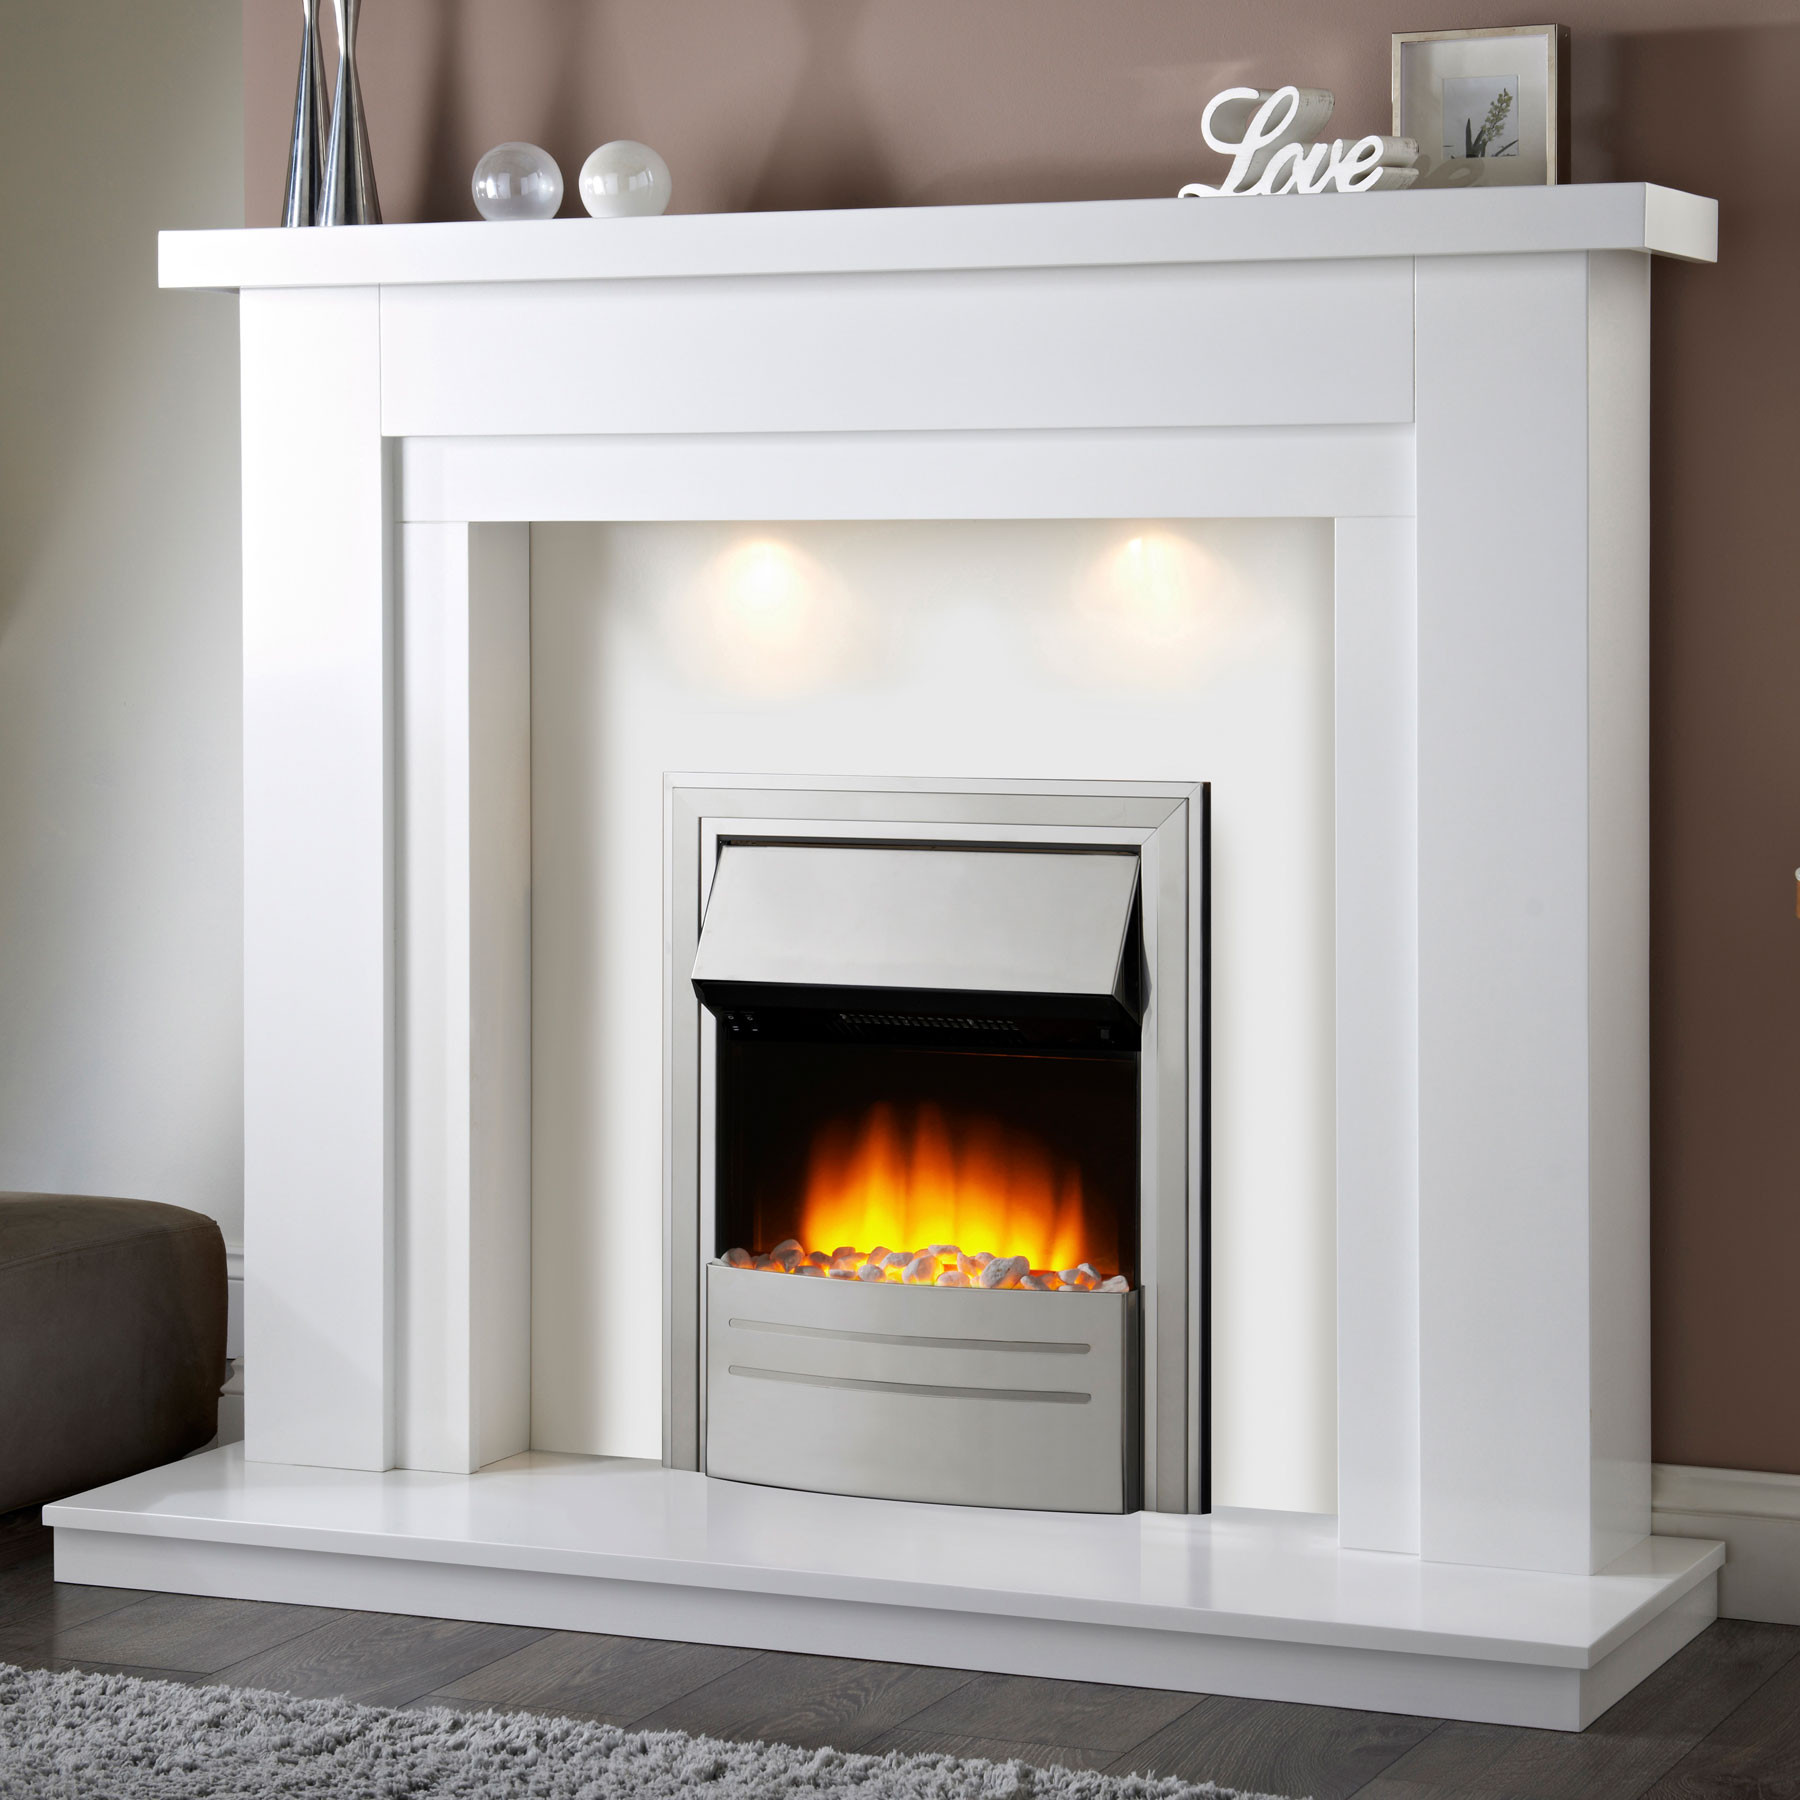 Fireplace thermopile Awesome White Fireplace Electric Charming Fireplace